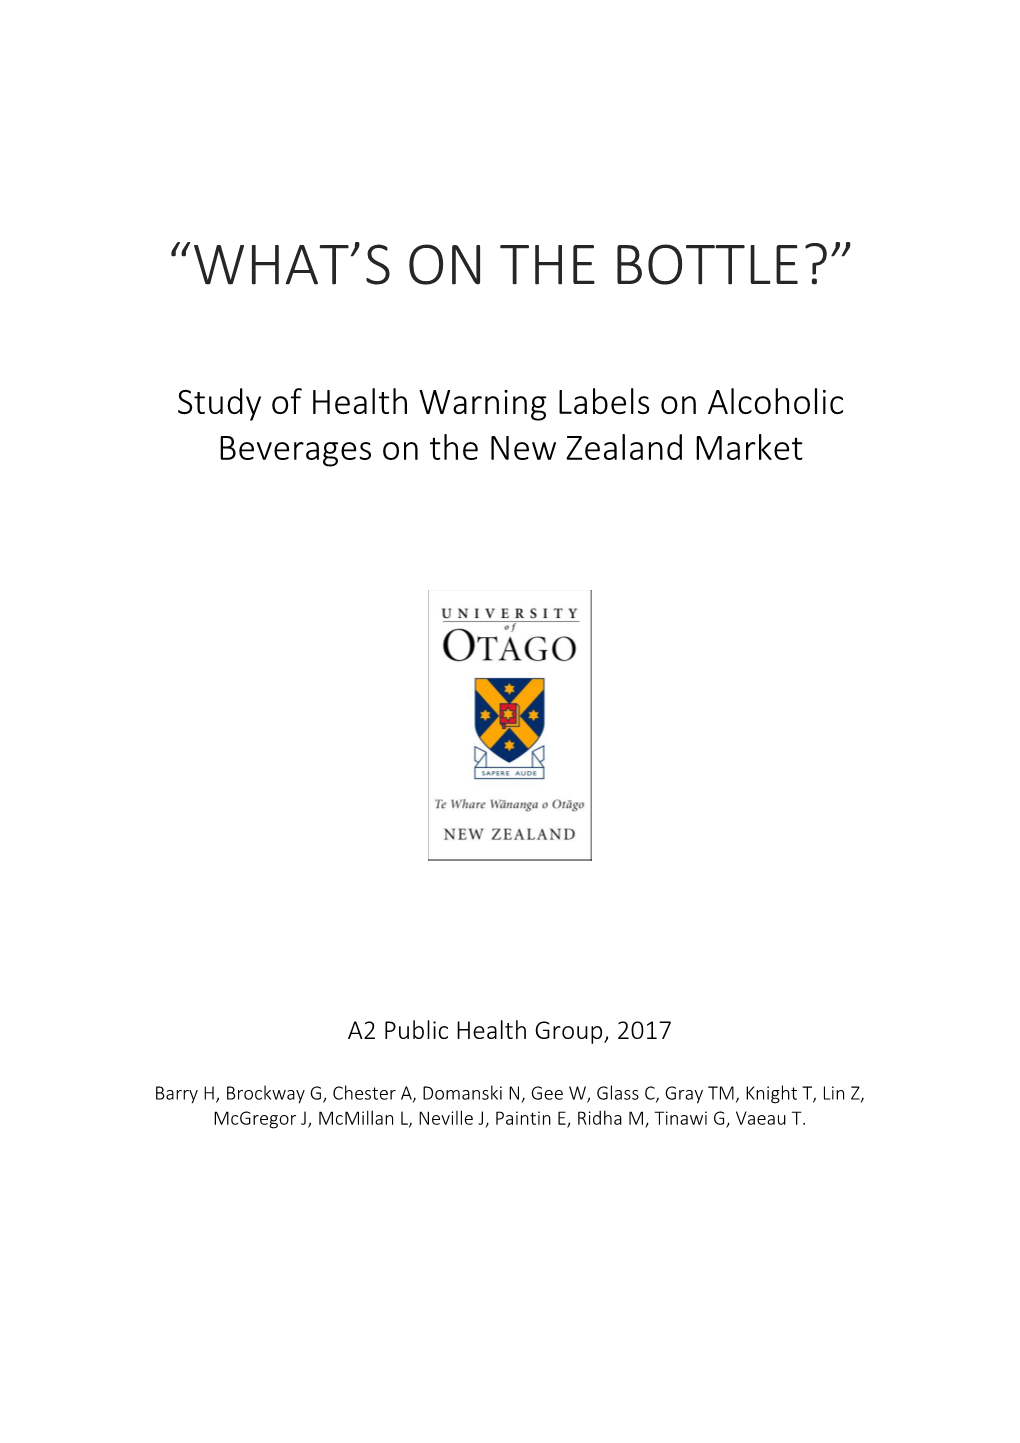 What's on the Bottle: Study of Health Warning Labels on Alcoholic